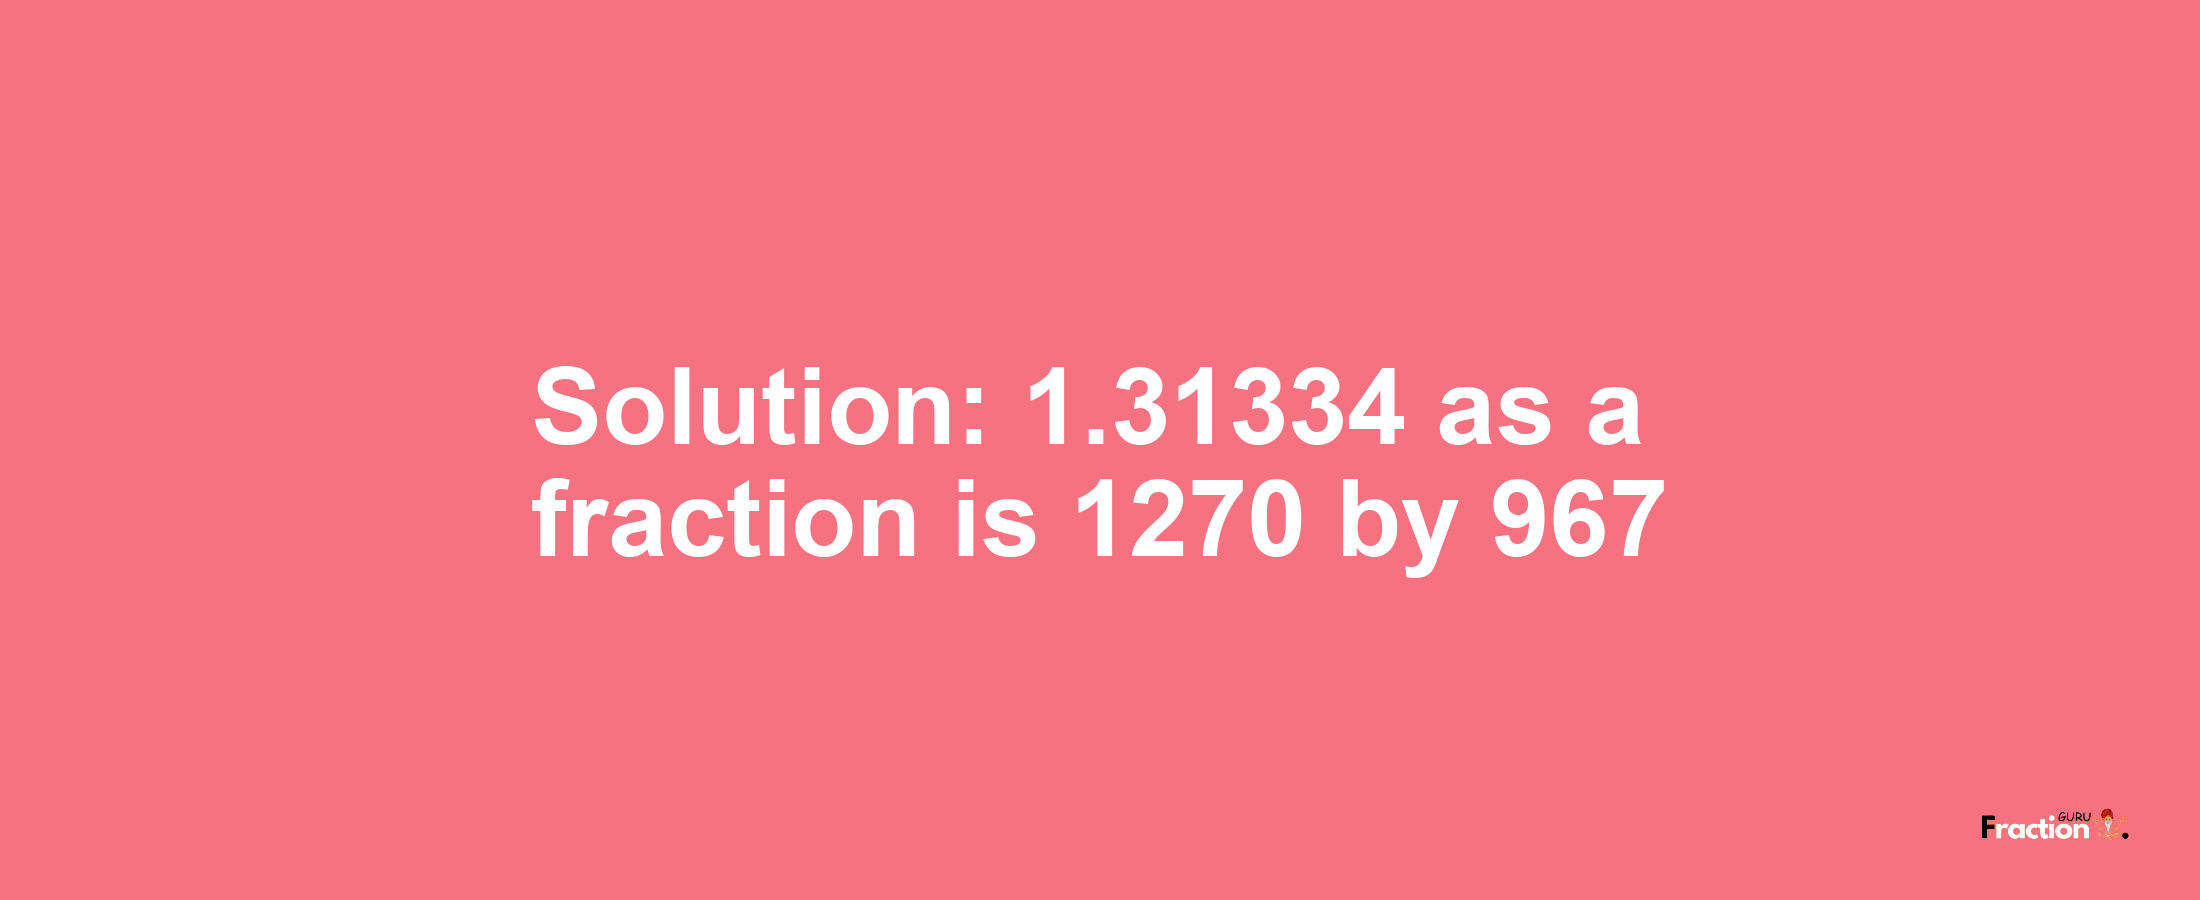 Solution:1.31334 as a fraction is 1270/967